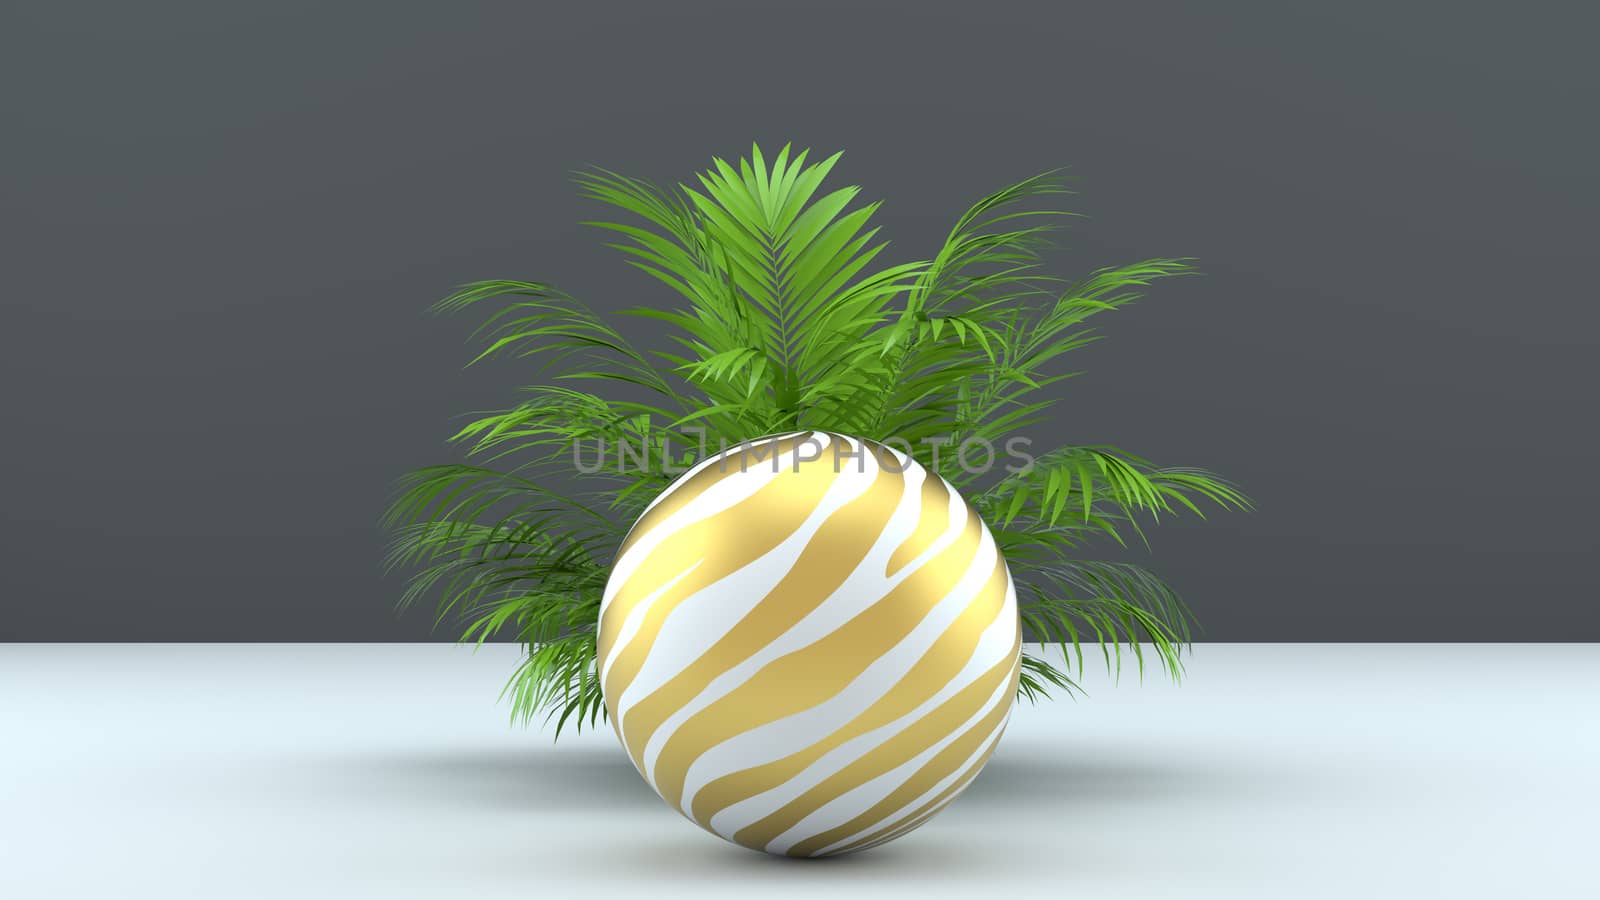 3d render abstract background with palm leaves, sphere and golden grid. Modern minimal design. Trendy background for product design or text presentation. by Shanvood